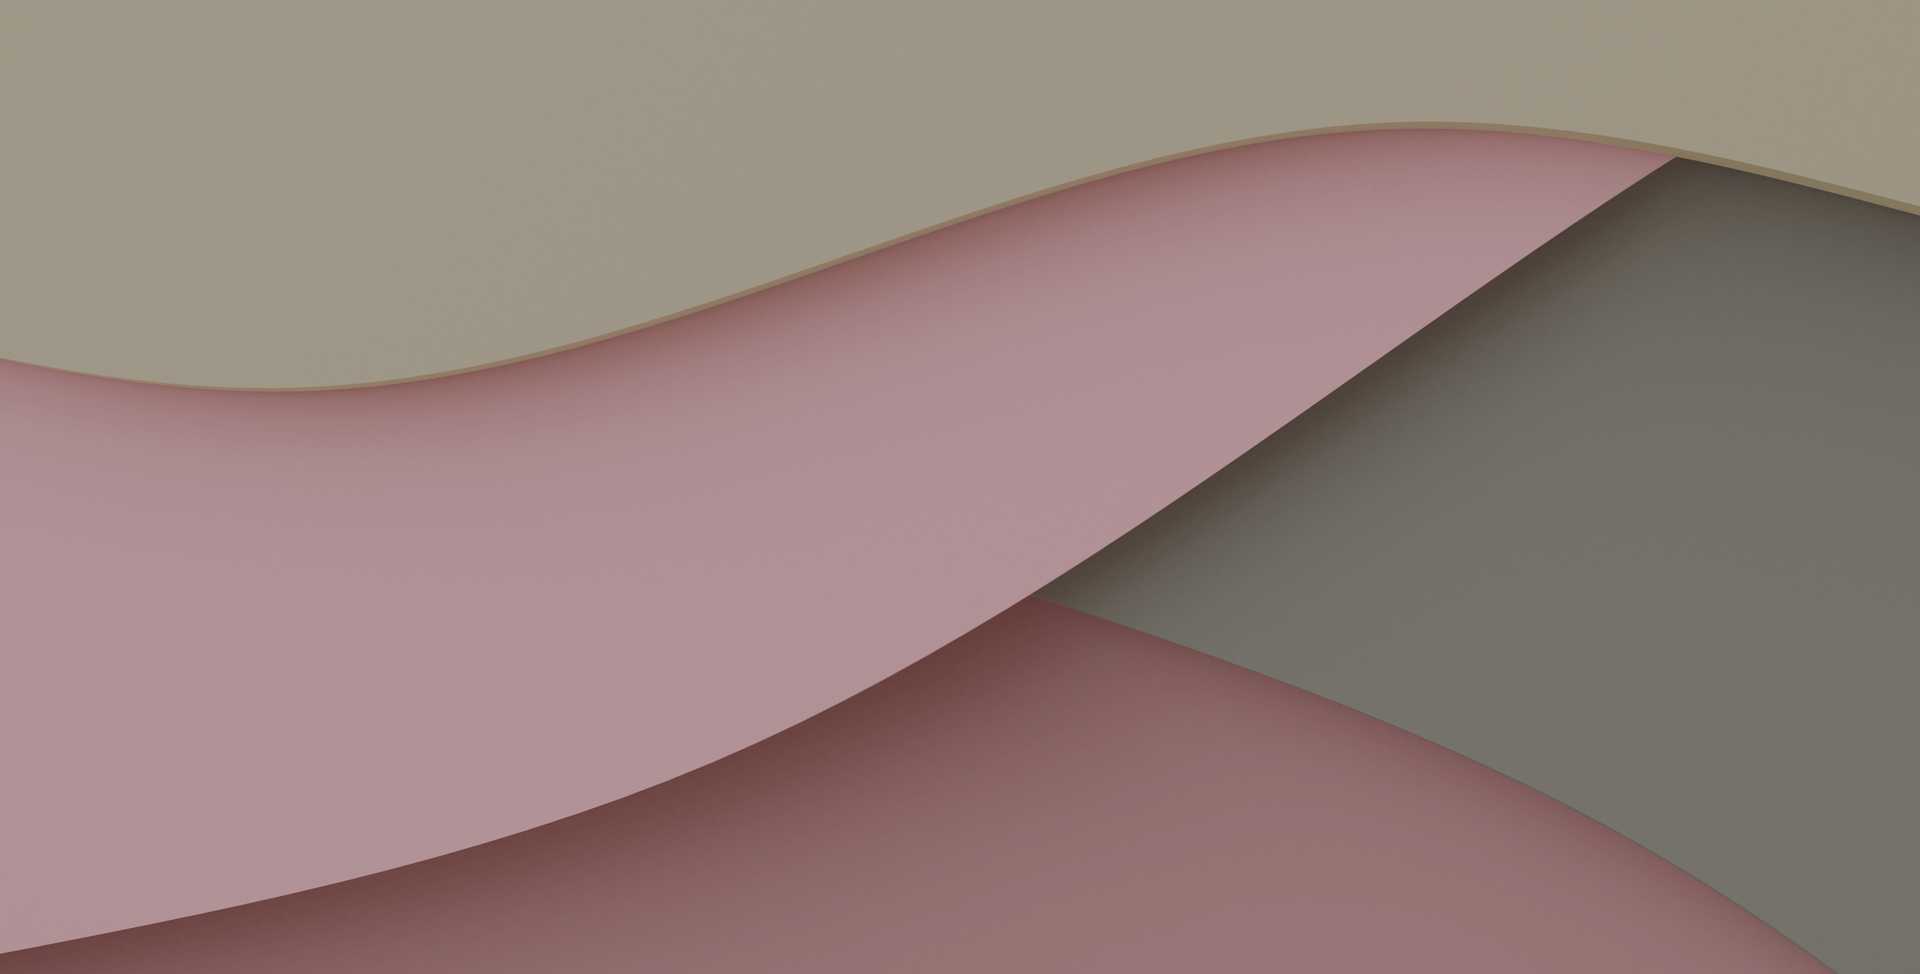 Abstract rendering of overlapping pink, green and beige waves resembling a flow